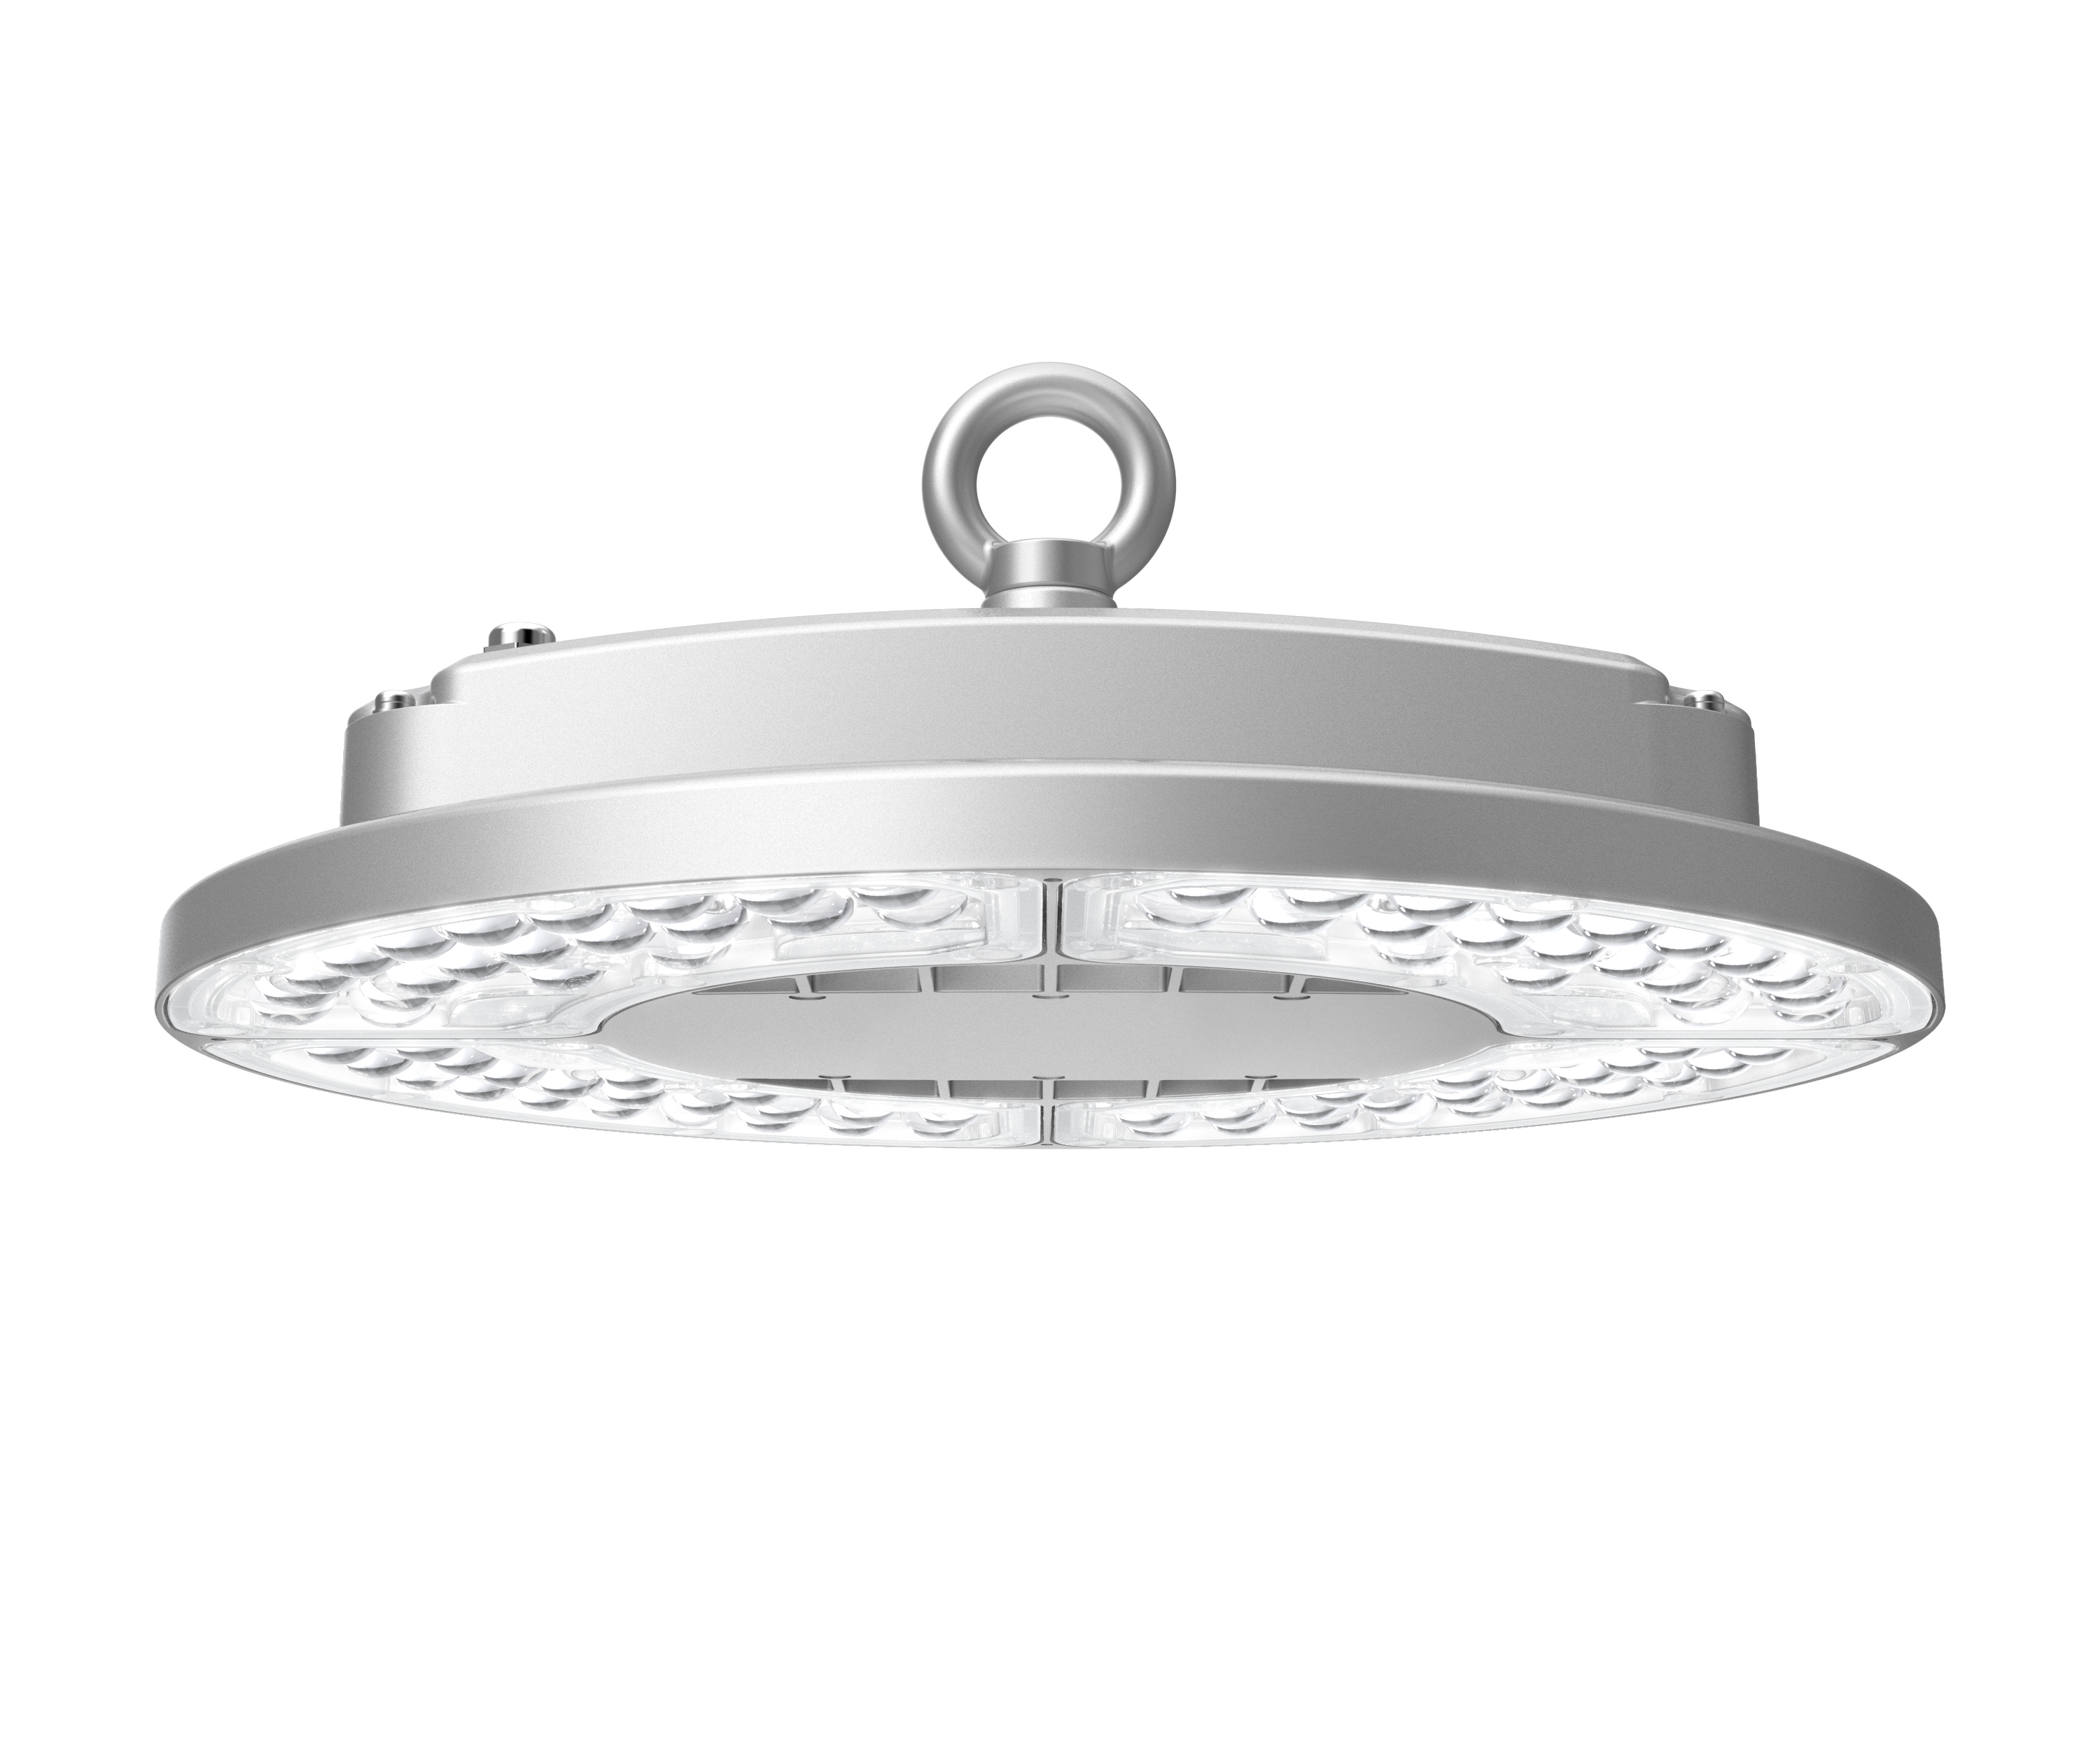 How LED High Bay Light Work with DALI Control in Factory? - AGC Lighting